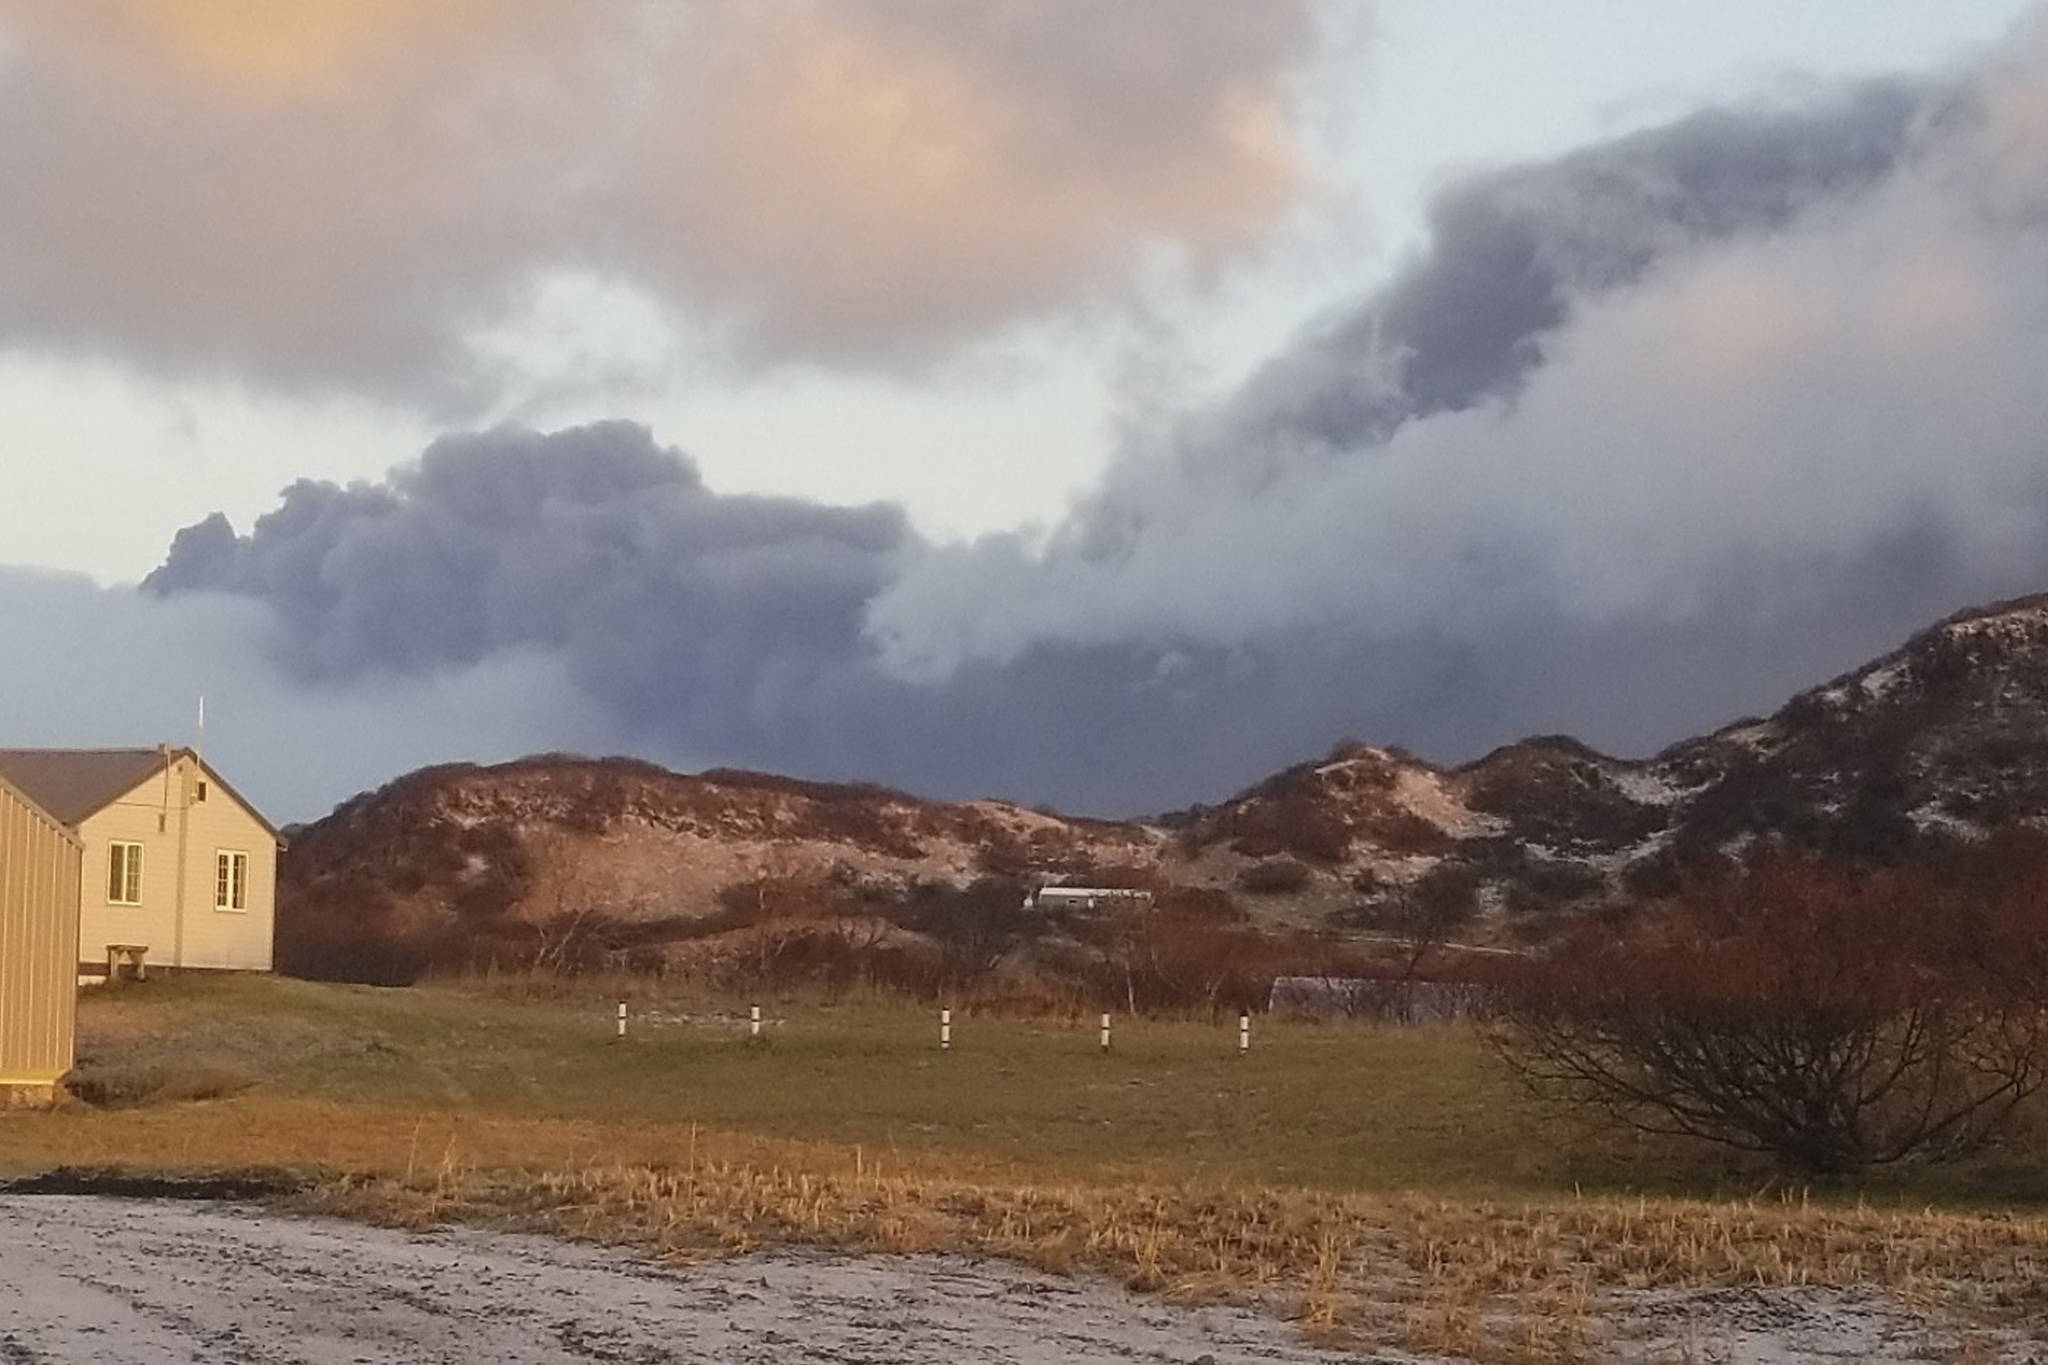 A black ash cloud from Alaska’s Mount Veniaminof passes the community of Perryville, Alaska, on Wednesday, Nov. 21, 2018. Alaska Volcano Observatory scientists said the overnight ash emissions from Mount Veniaminof generated an ash plume that drifted more than 150 miles (241 kilometers) to the southeast. (Victoria Tague via AP)